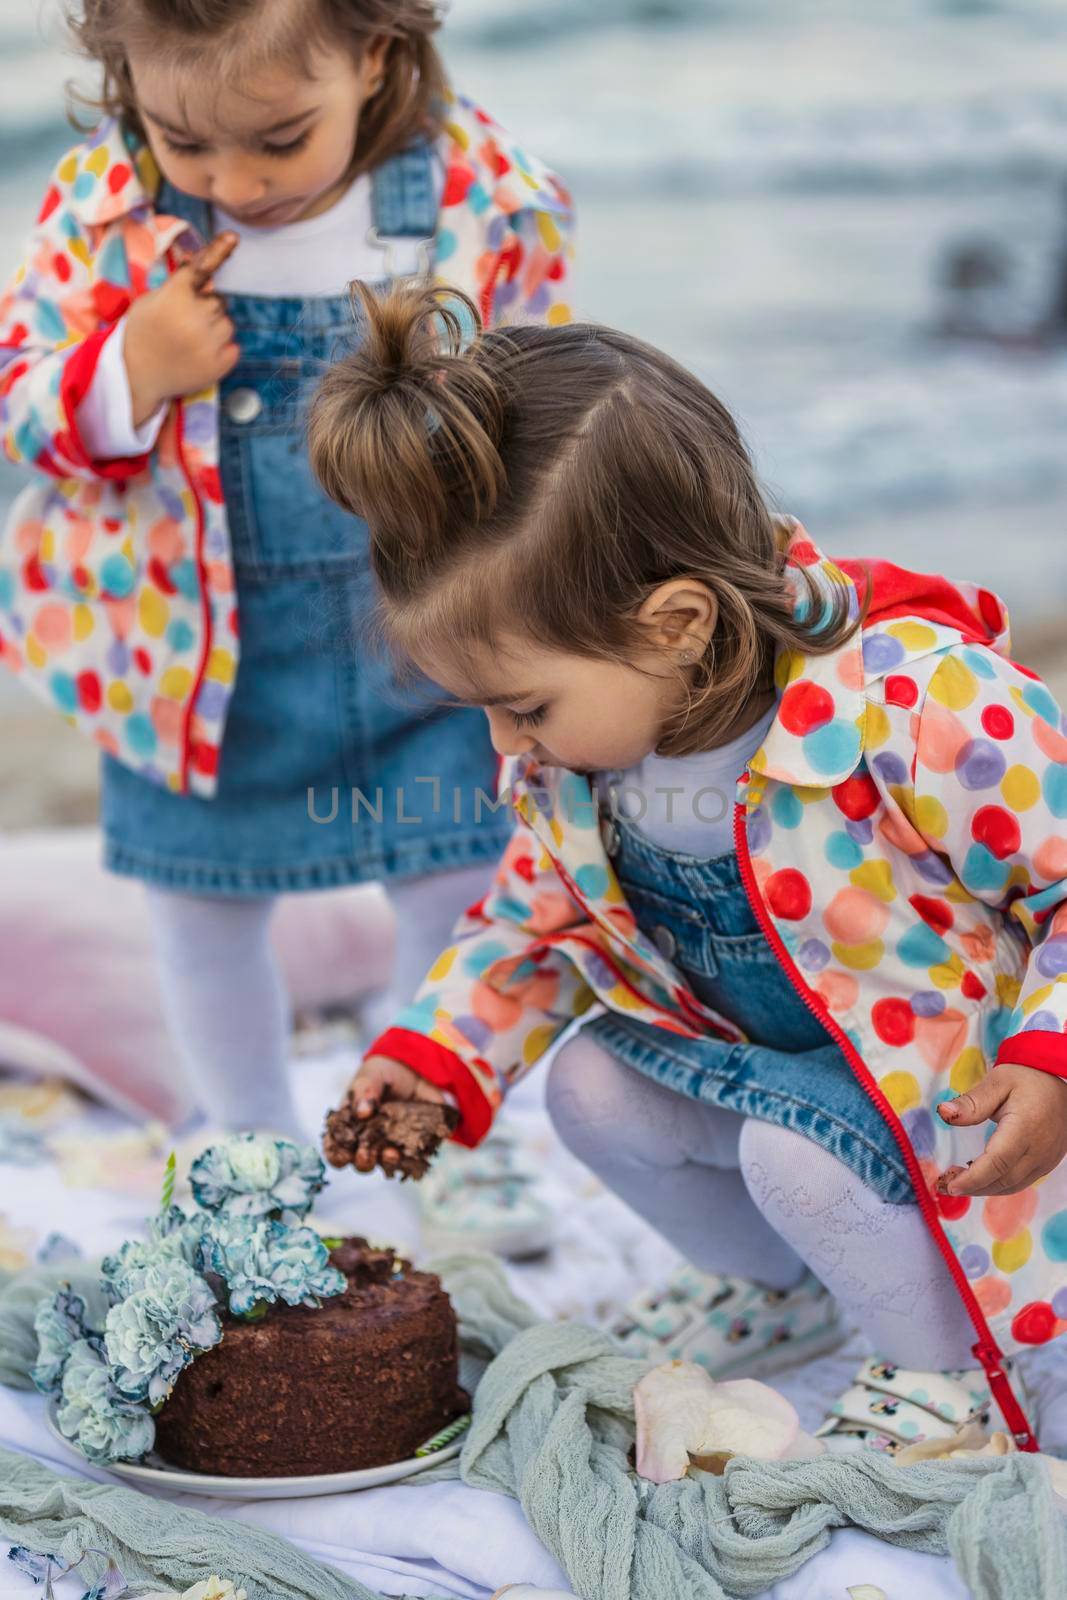 children eat chocolate covered cake with their hands